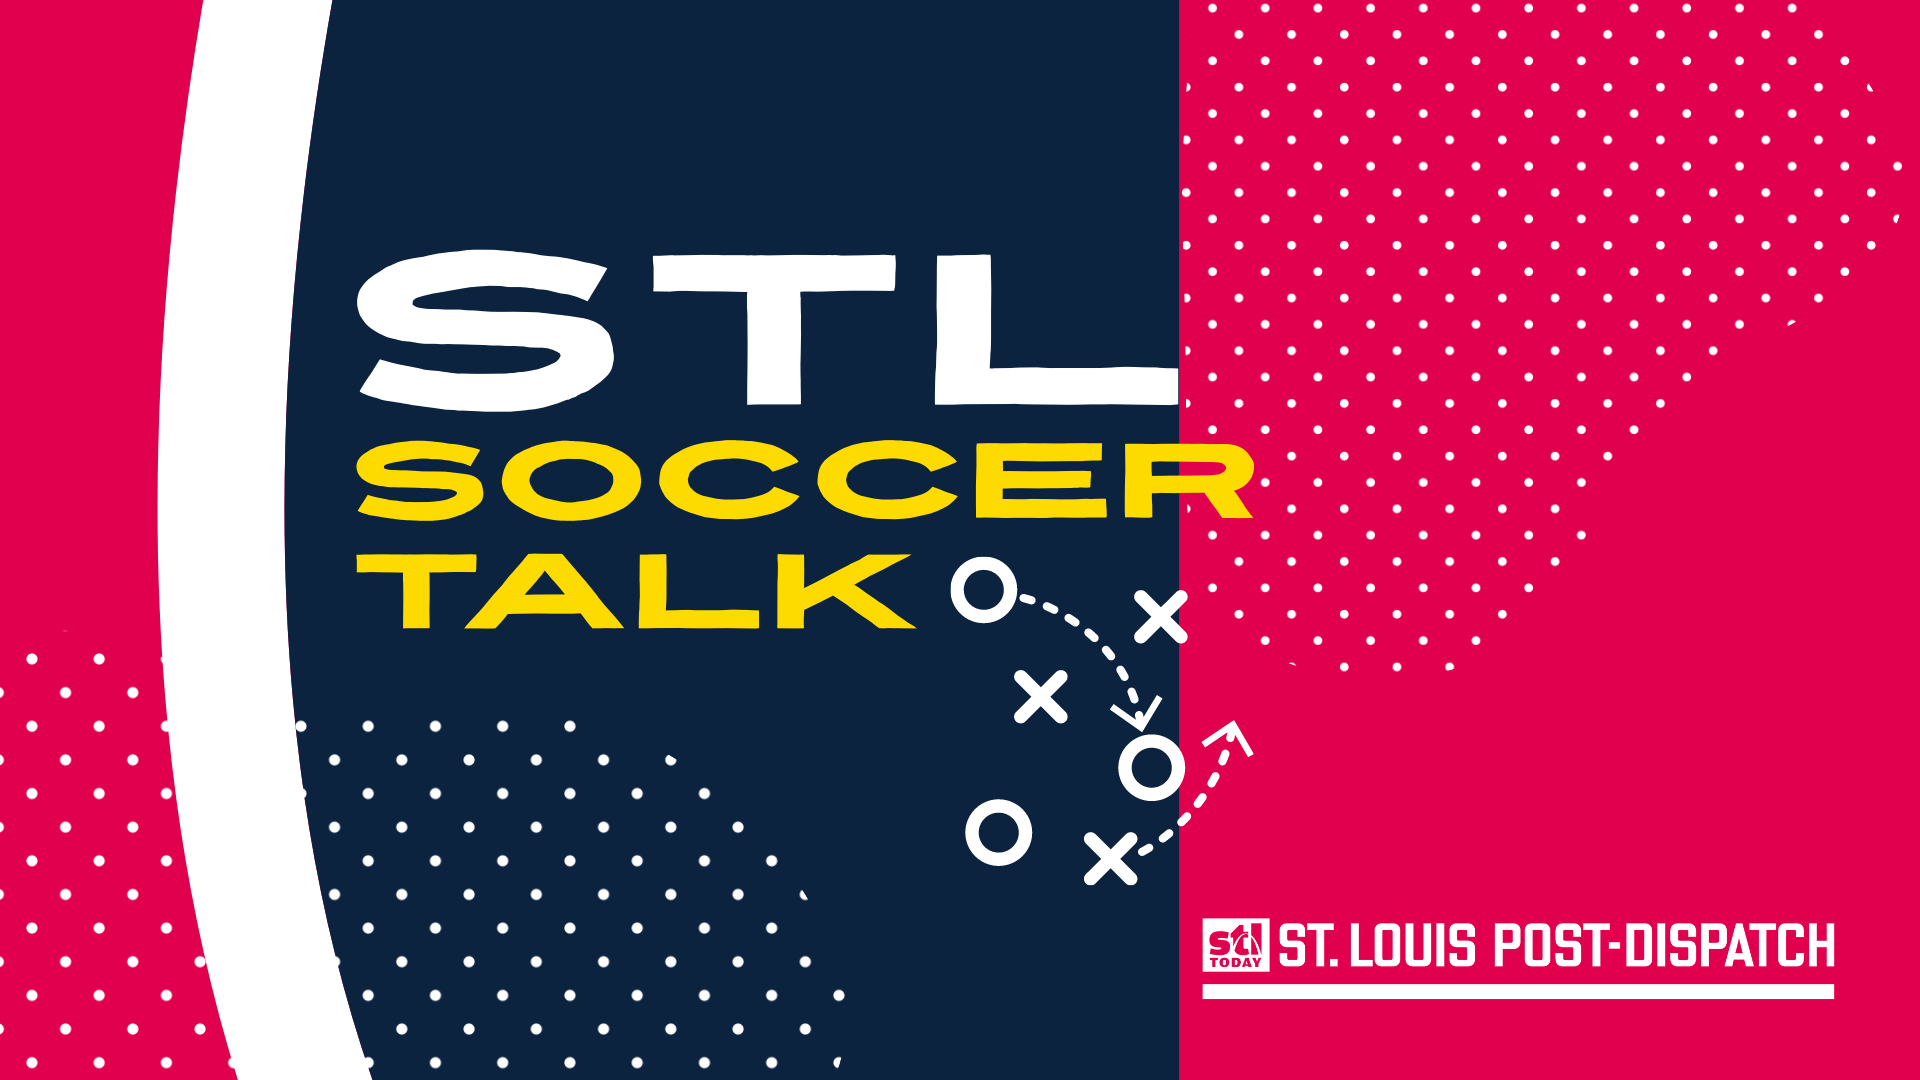 St. Louis City SC reflects on Saturday's 1-0 loss in Chicago